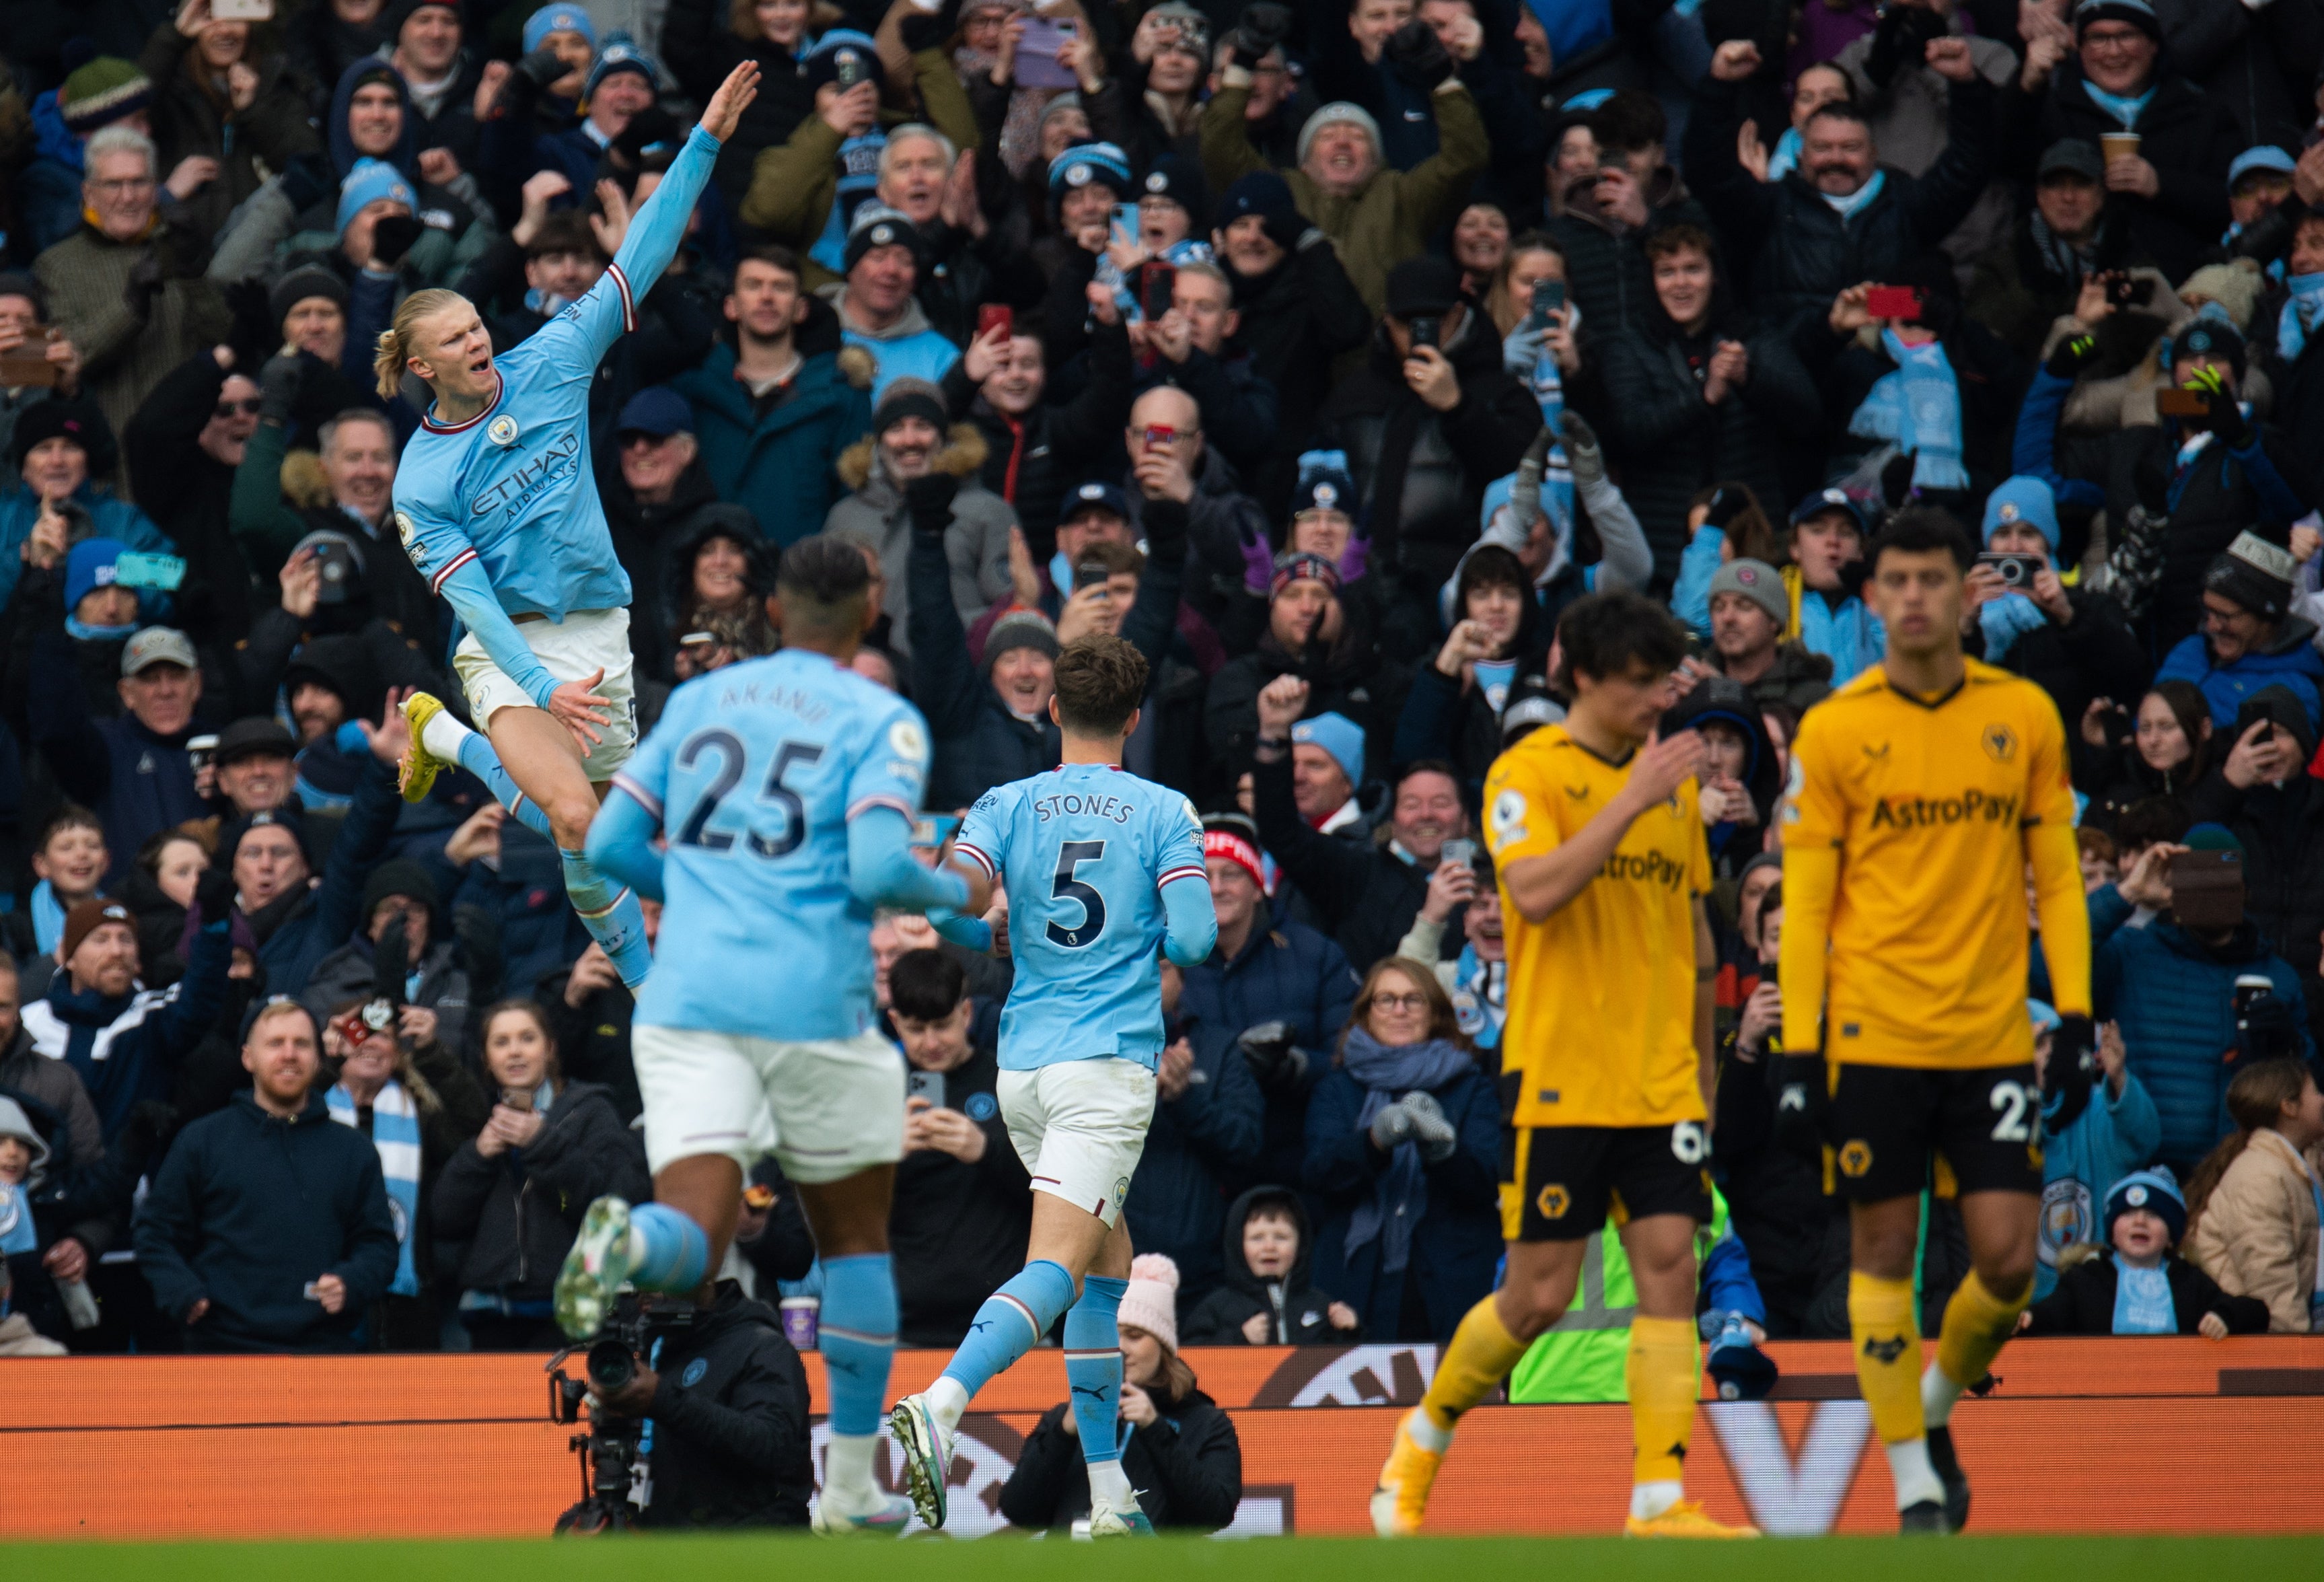 Man City vs Wolves result: Final score, goals, highlights and League match report | The Independent